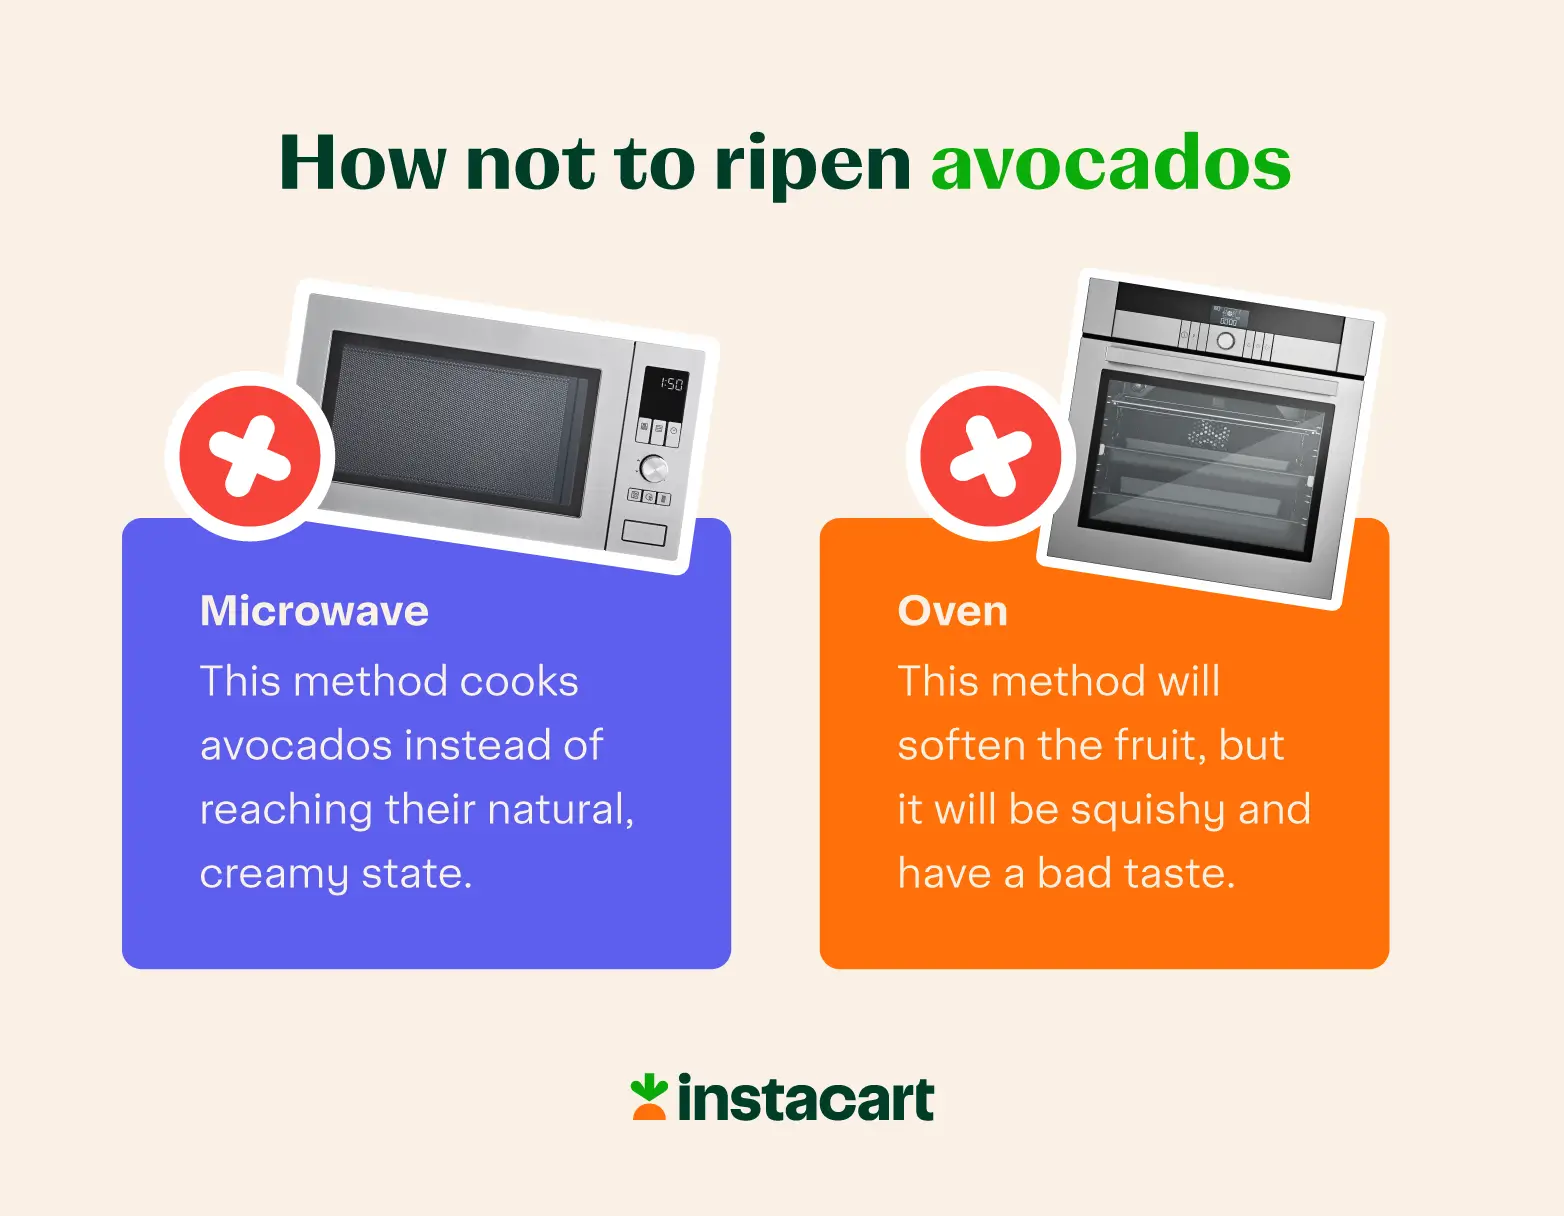 graphic showing how not to ripen avocados